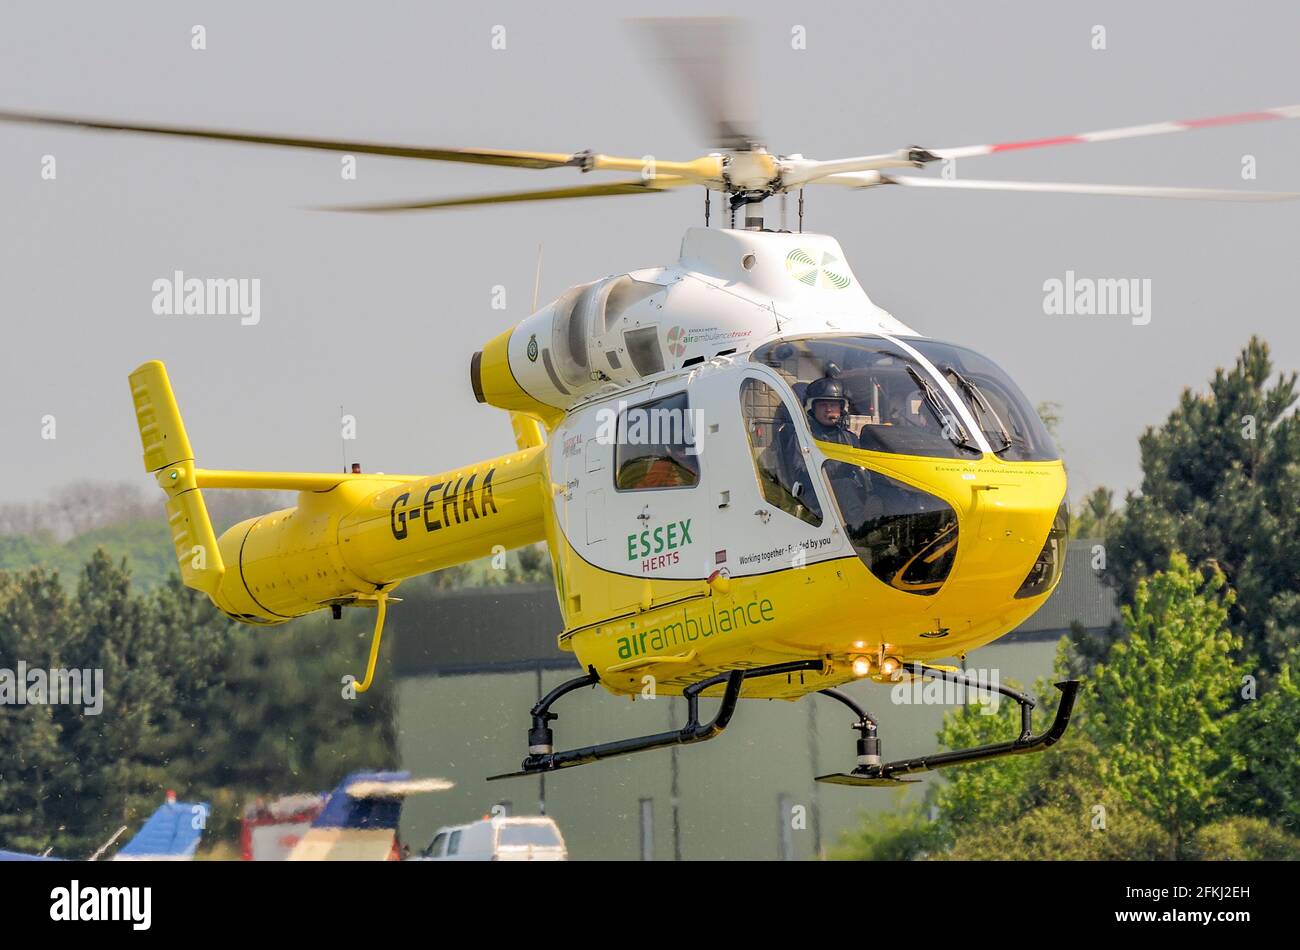 Essex & Herts Air Ambulance helicopter G-EHAA at Earls Colne airfield, Essex, UK. MD Helicopters MD Explorer aircraft. HEMS. Landing Stock Photo